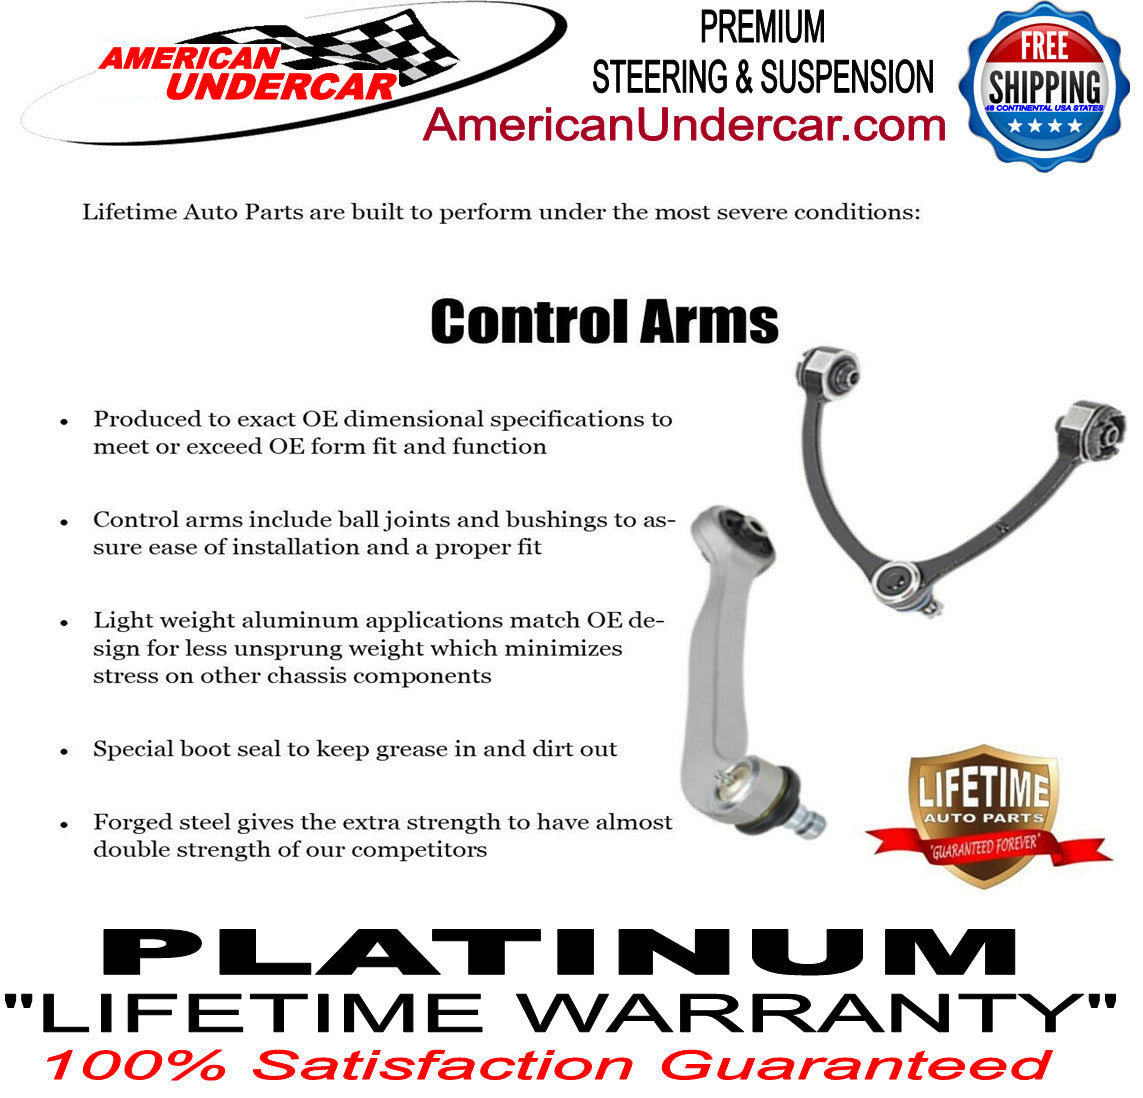 Lifetime Ball Joint Steering Suspension Kit for 2011-2016 Ford F450 Super Duty 4x4